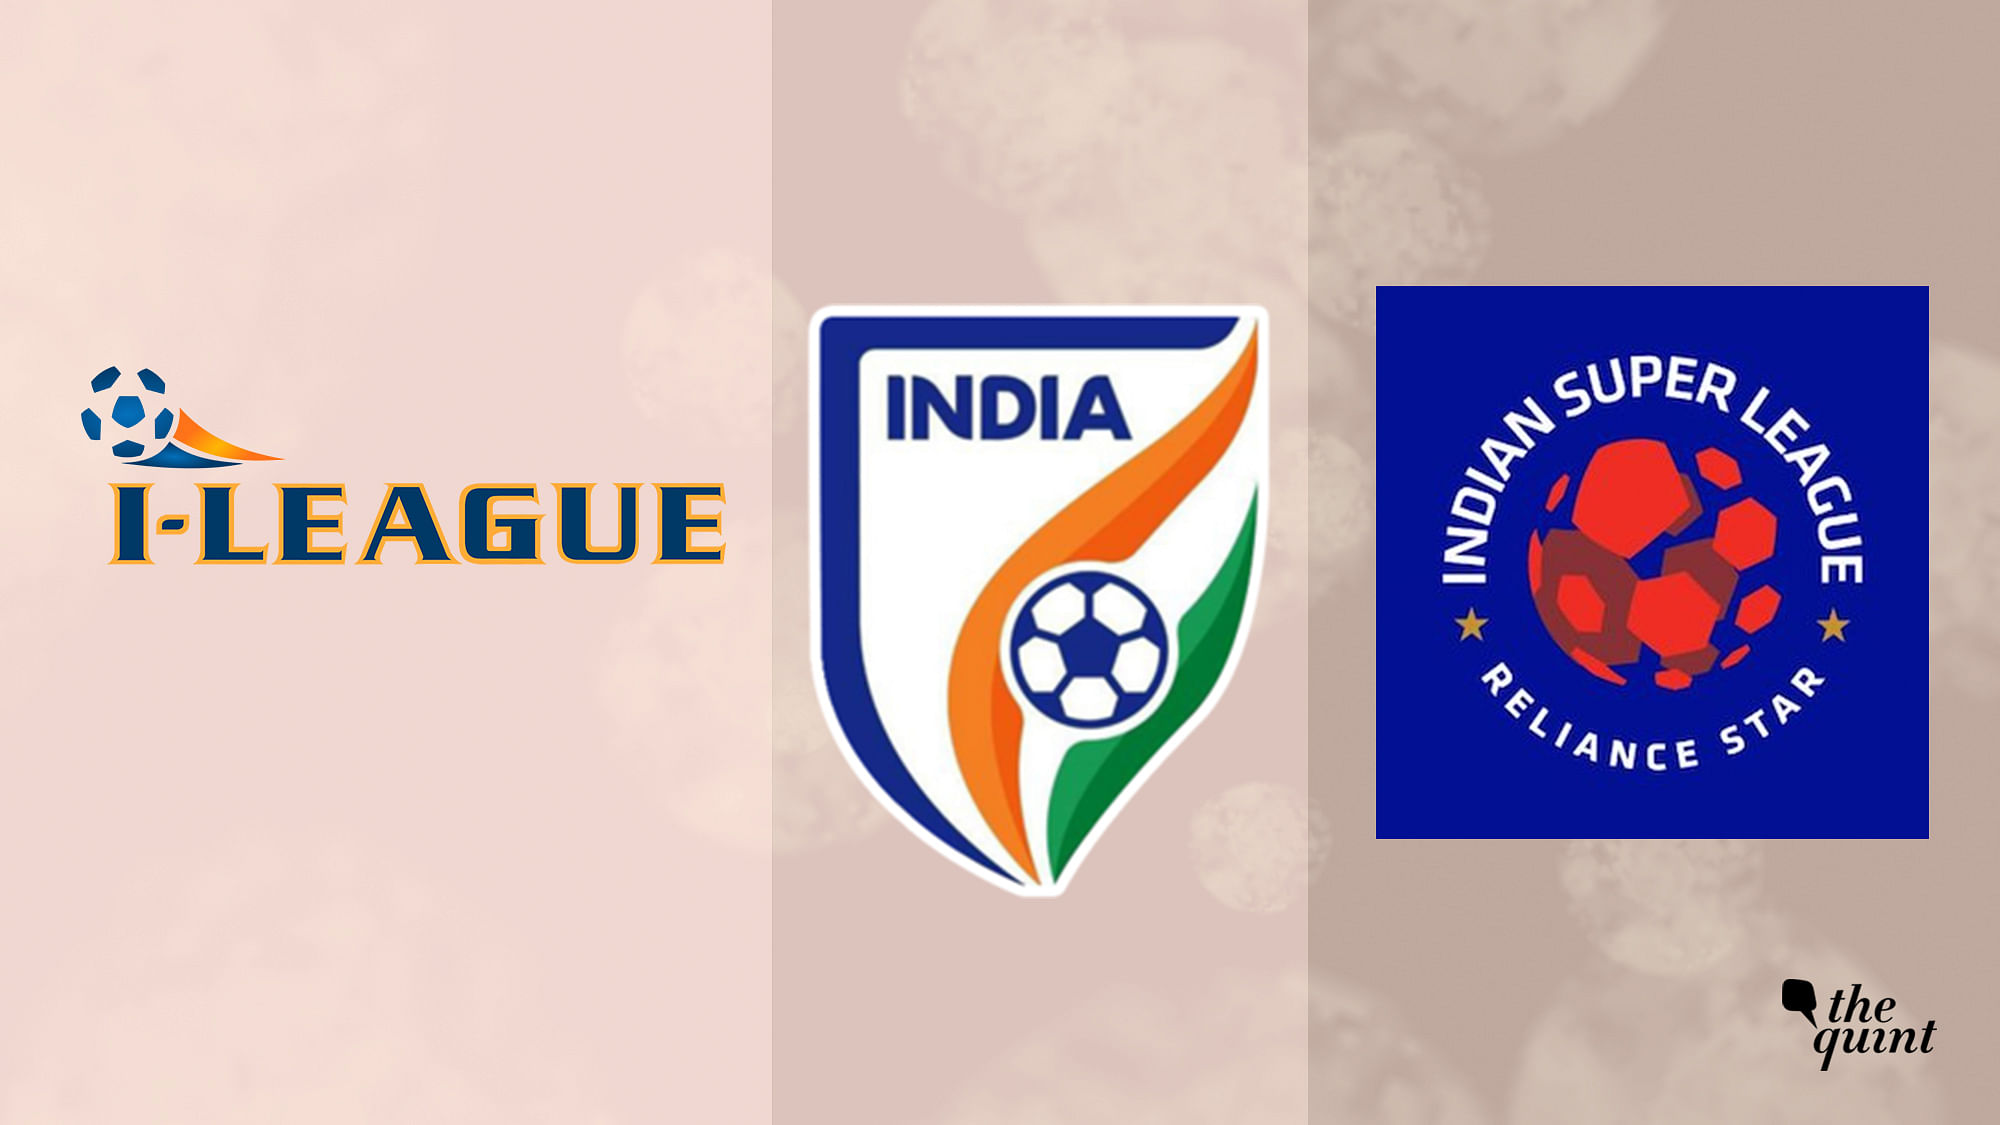  ISL will be the top league in the country from this season itself while I-League will continue as second tier league.